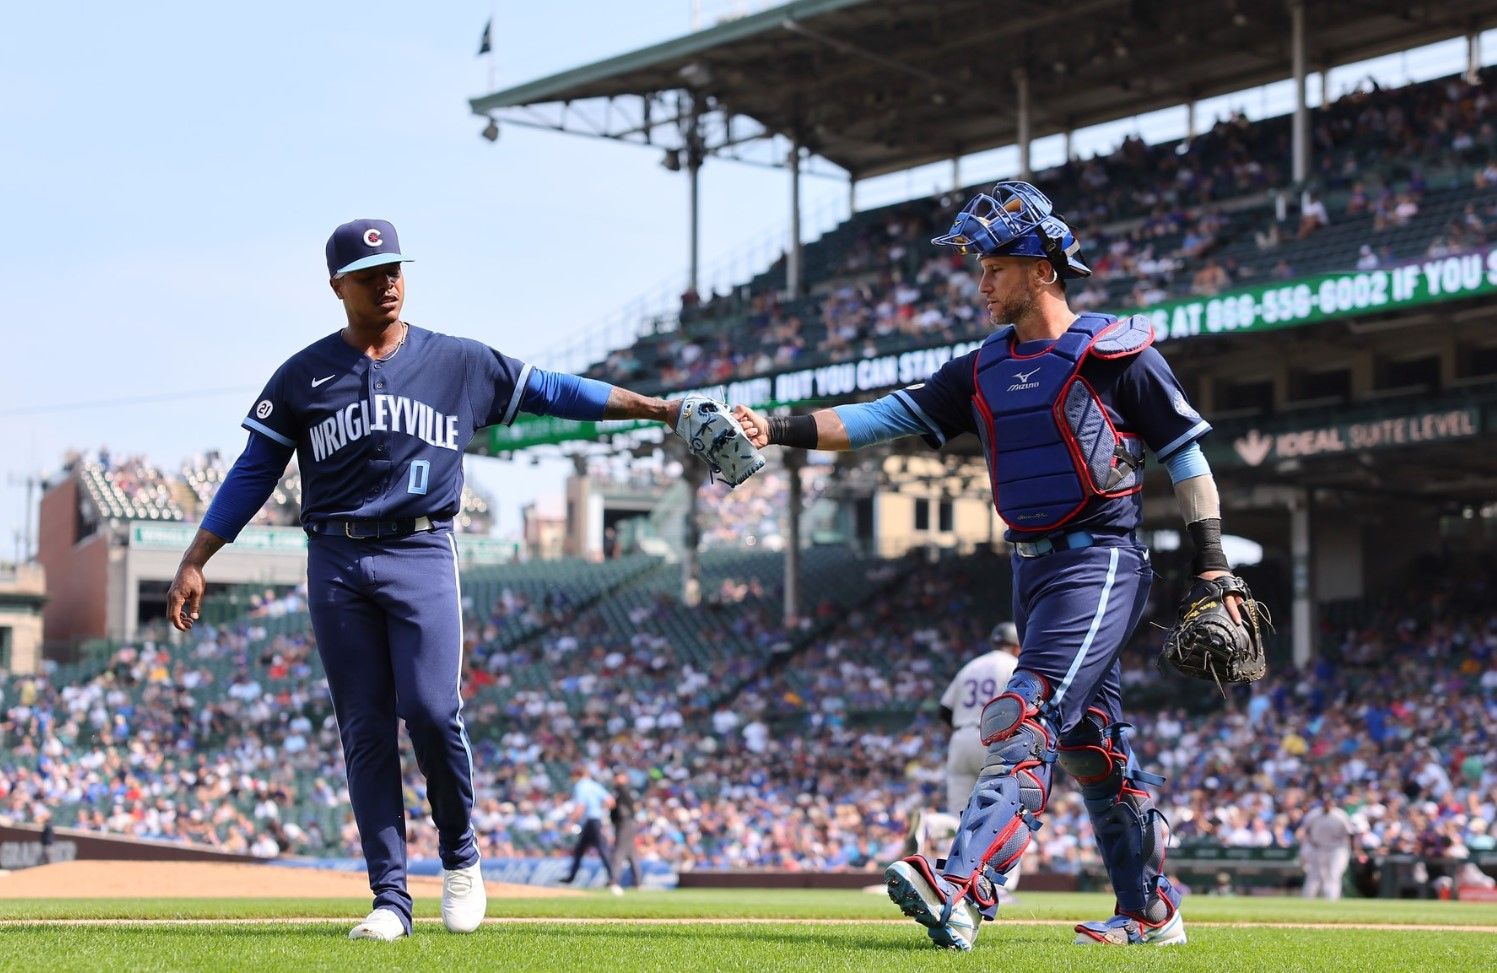 Stroman wins at Wrigley, Cubs top Rockies 2-1 for 4th in row